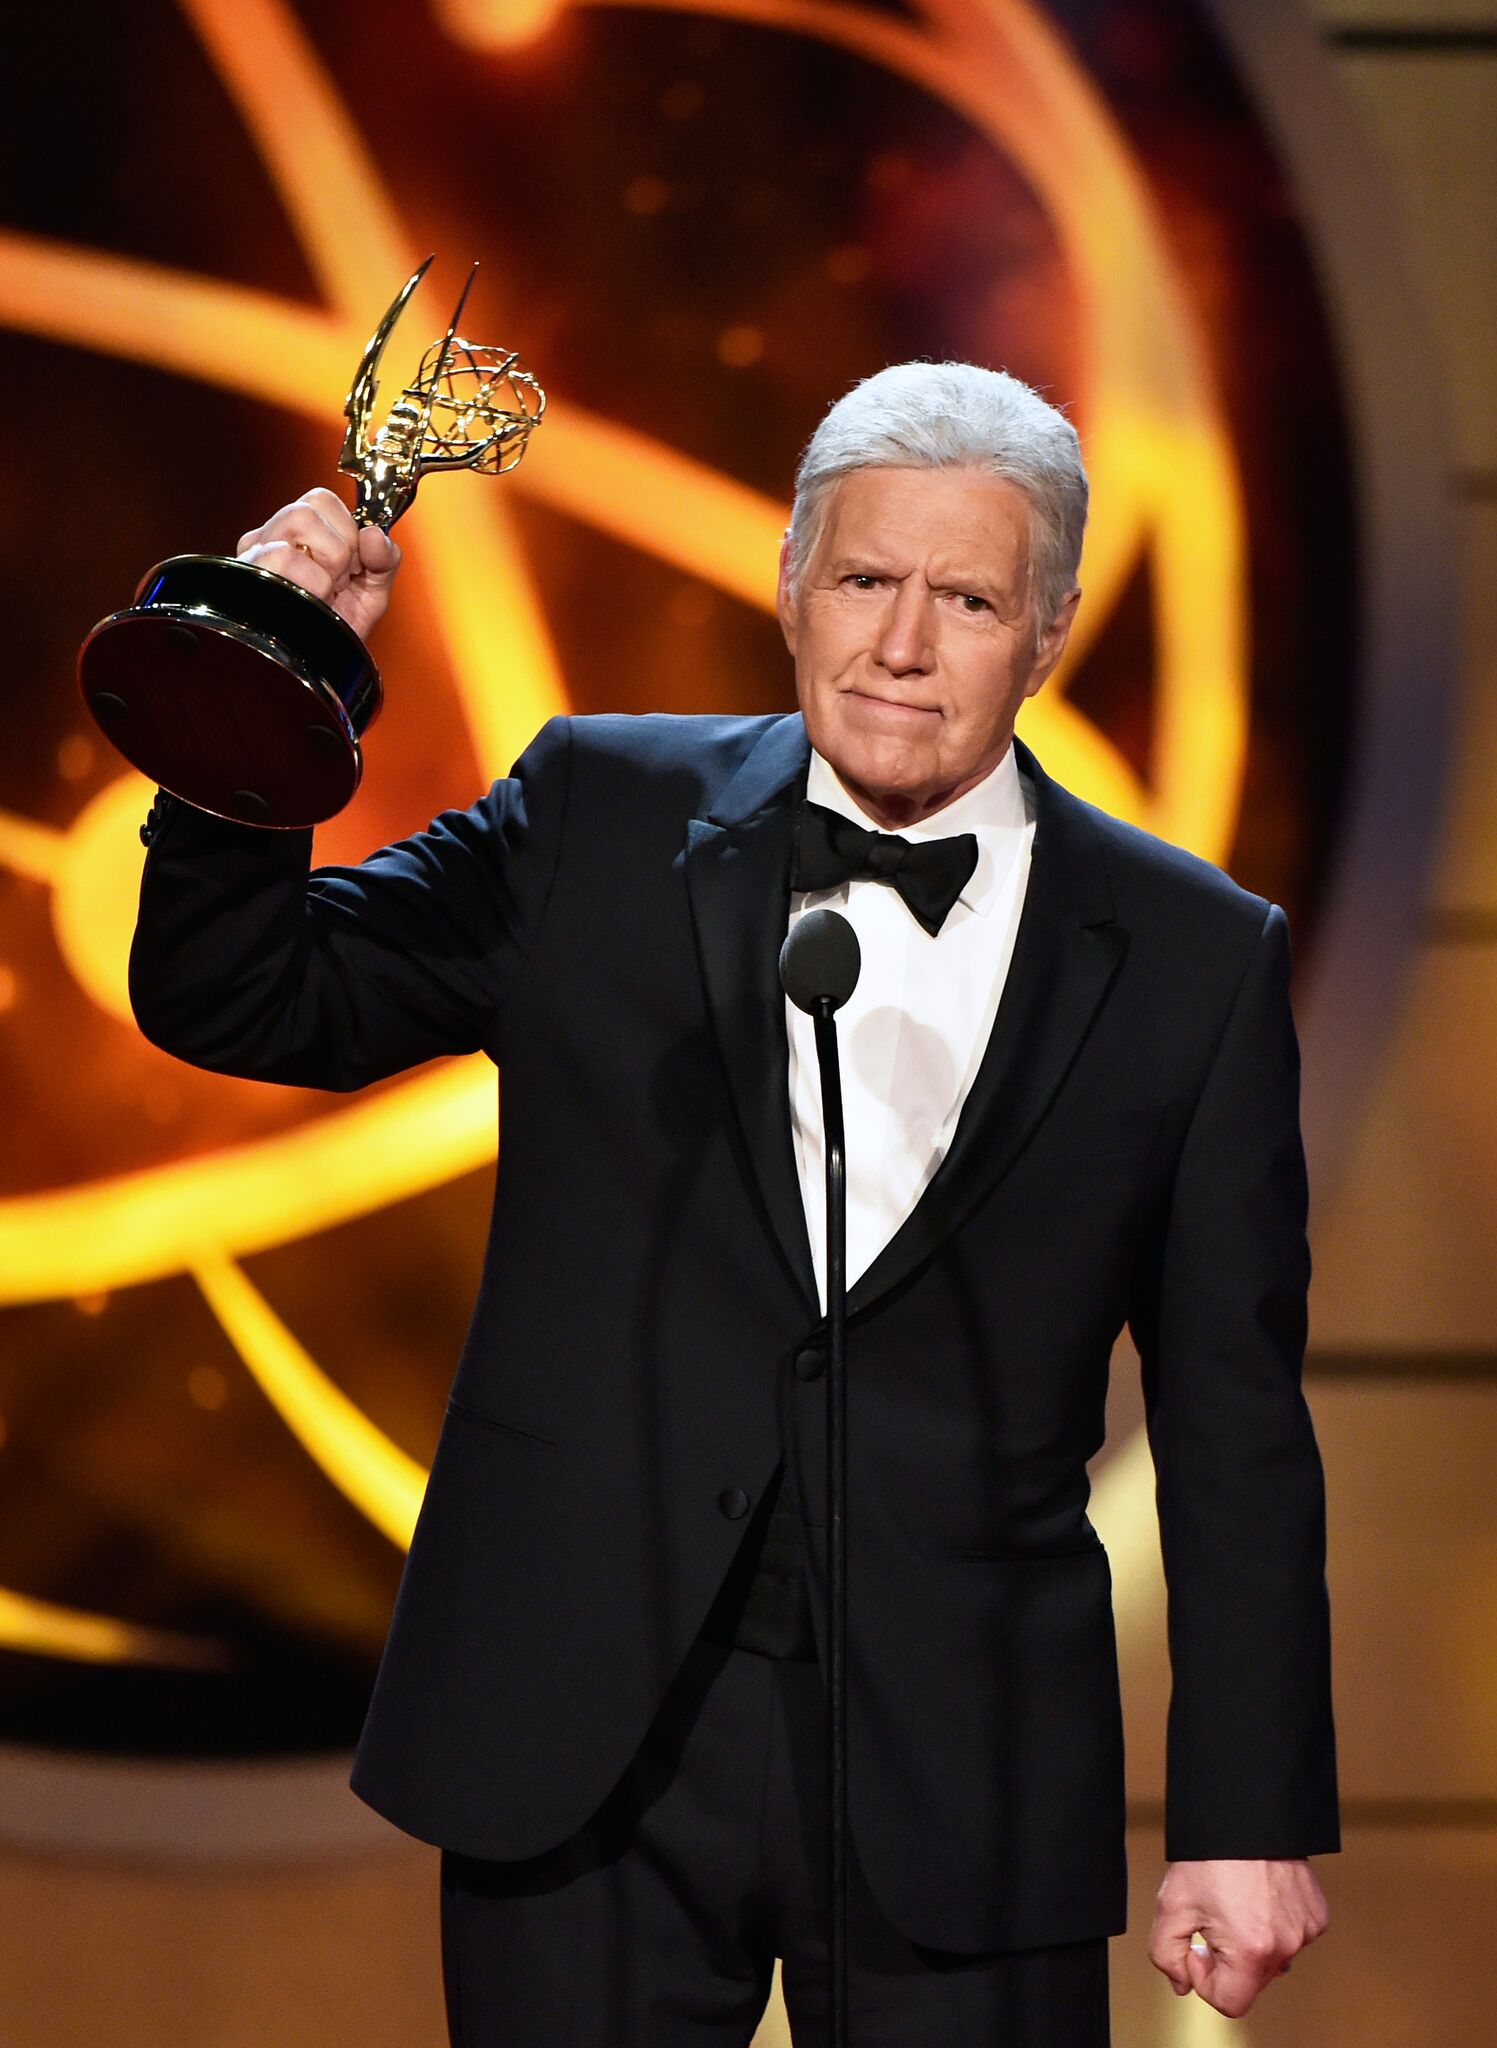 Alex Trebek accepts the Daytime Emmy Award for Outstanding Game Show Host onstage during the 46th annual Daytime Emmy Awards | Getty Images